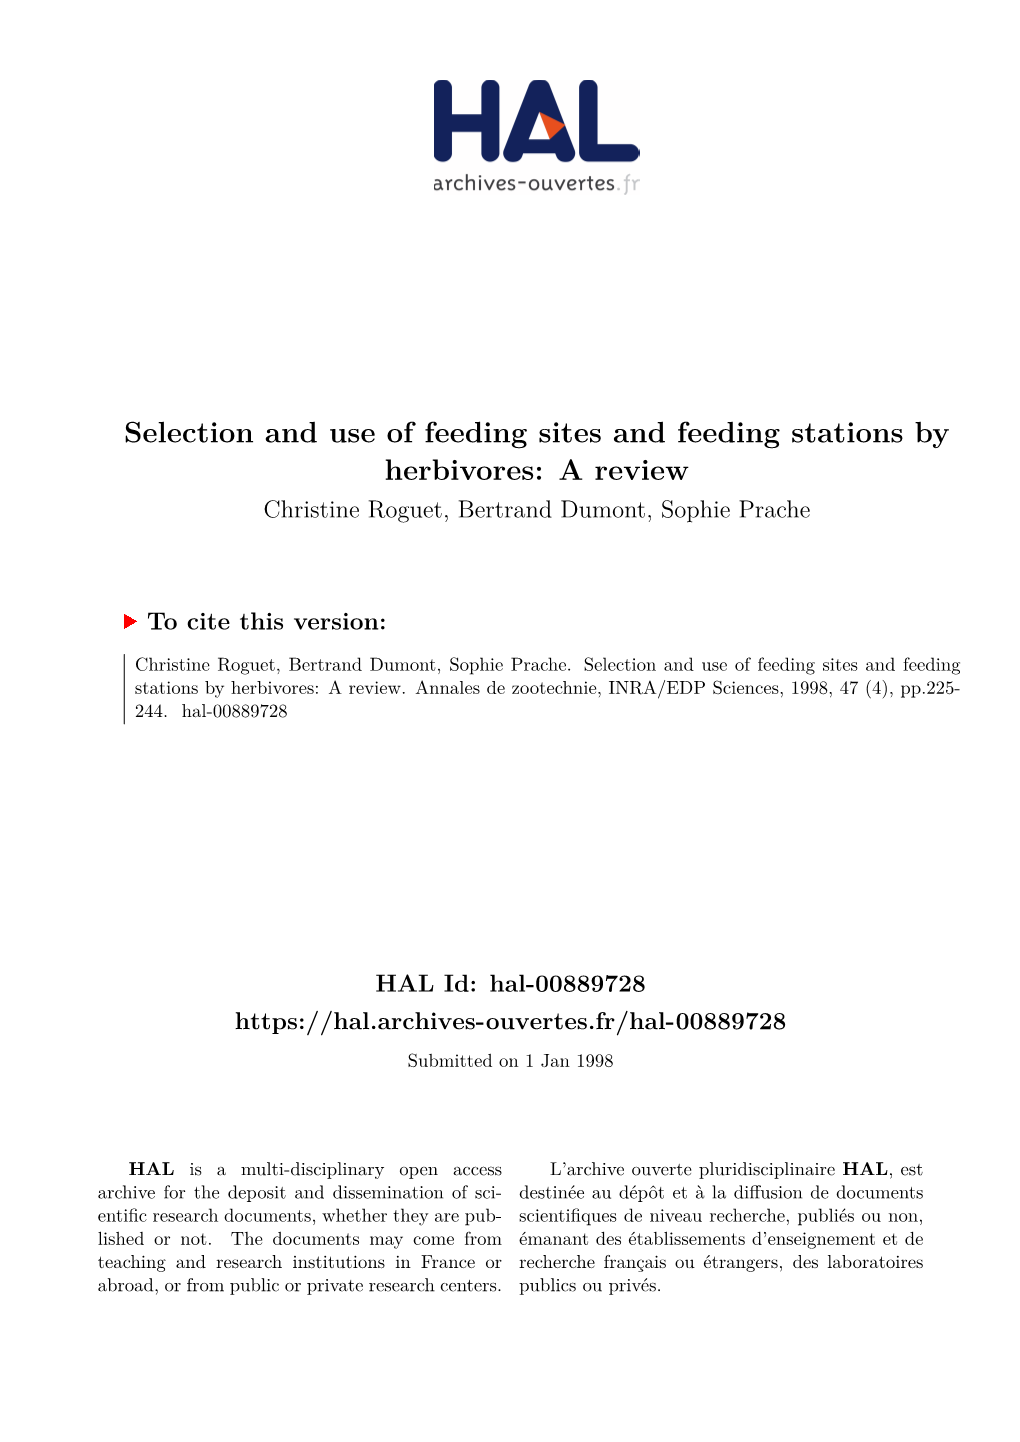 Selection and Use of Feeding Sites and Feeding Stations by Herbivores: a Review Christine Roguet, Bertrand Dumont, Sophie Prache